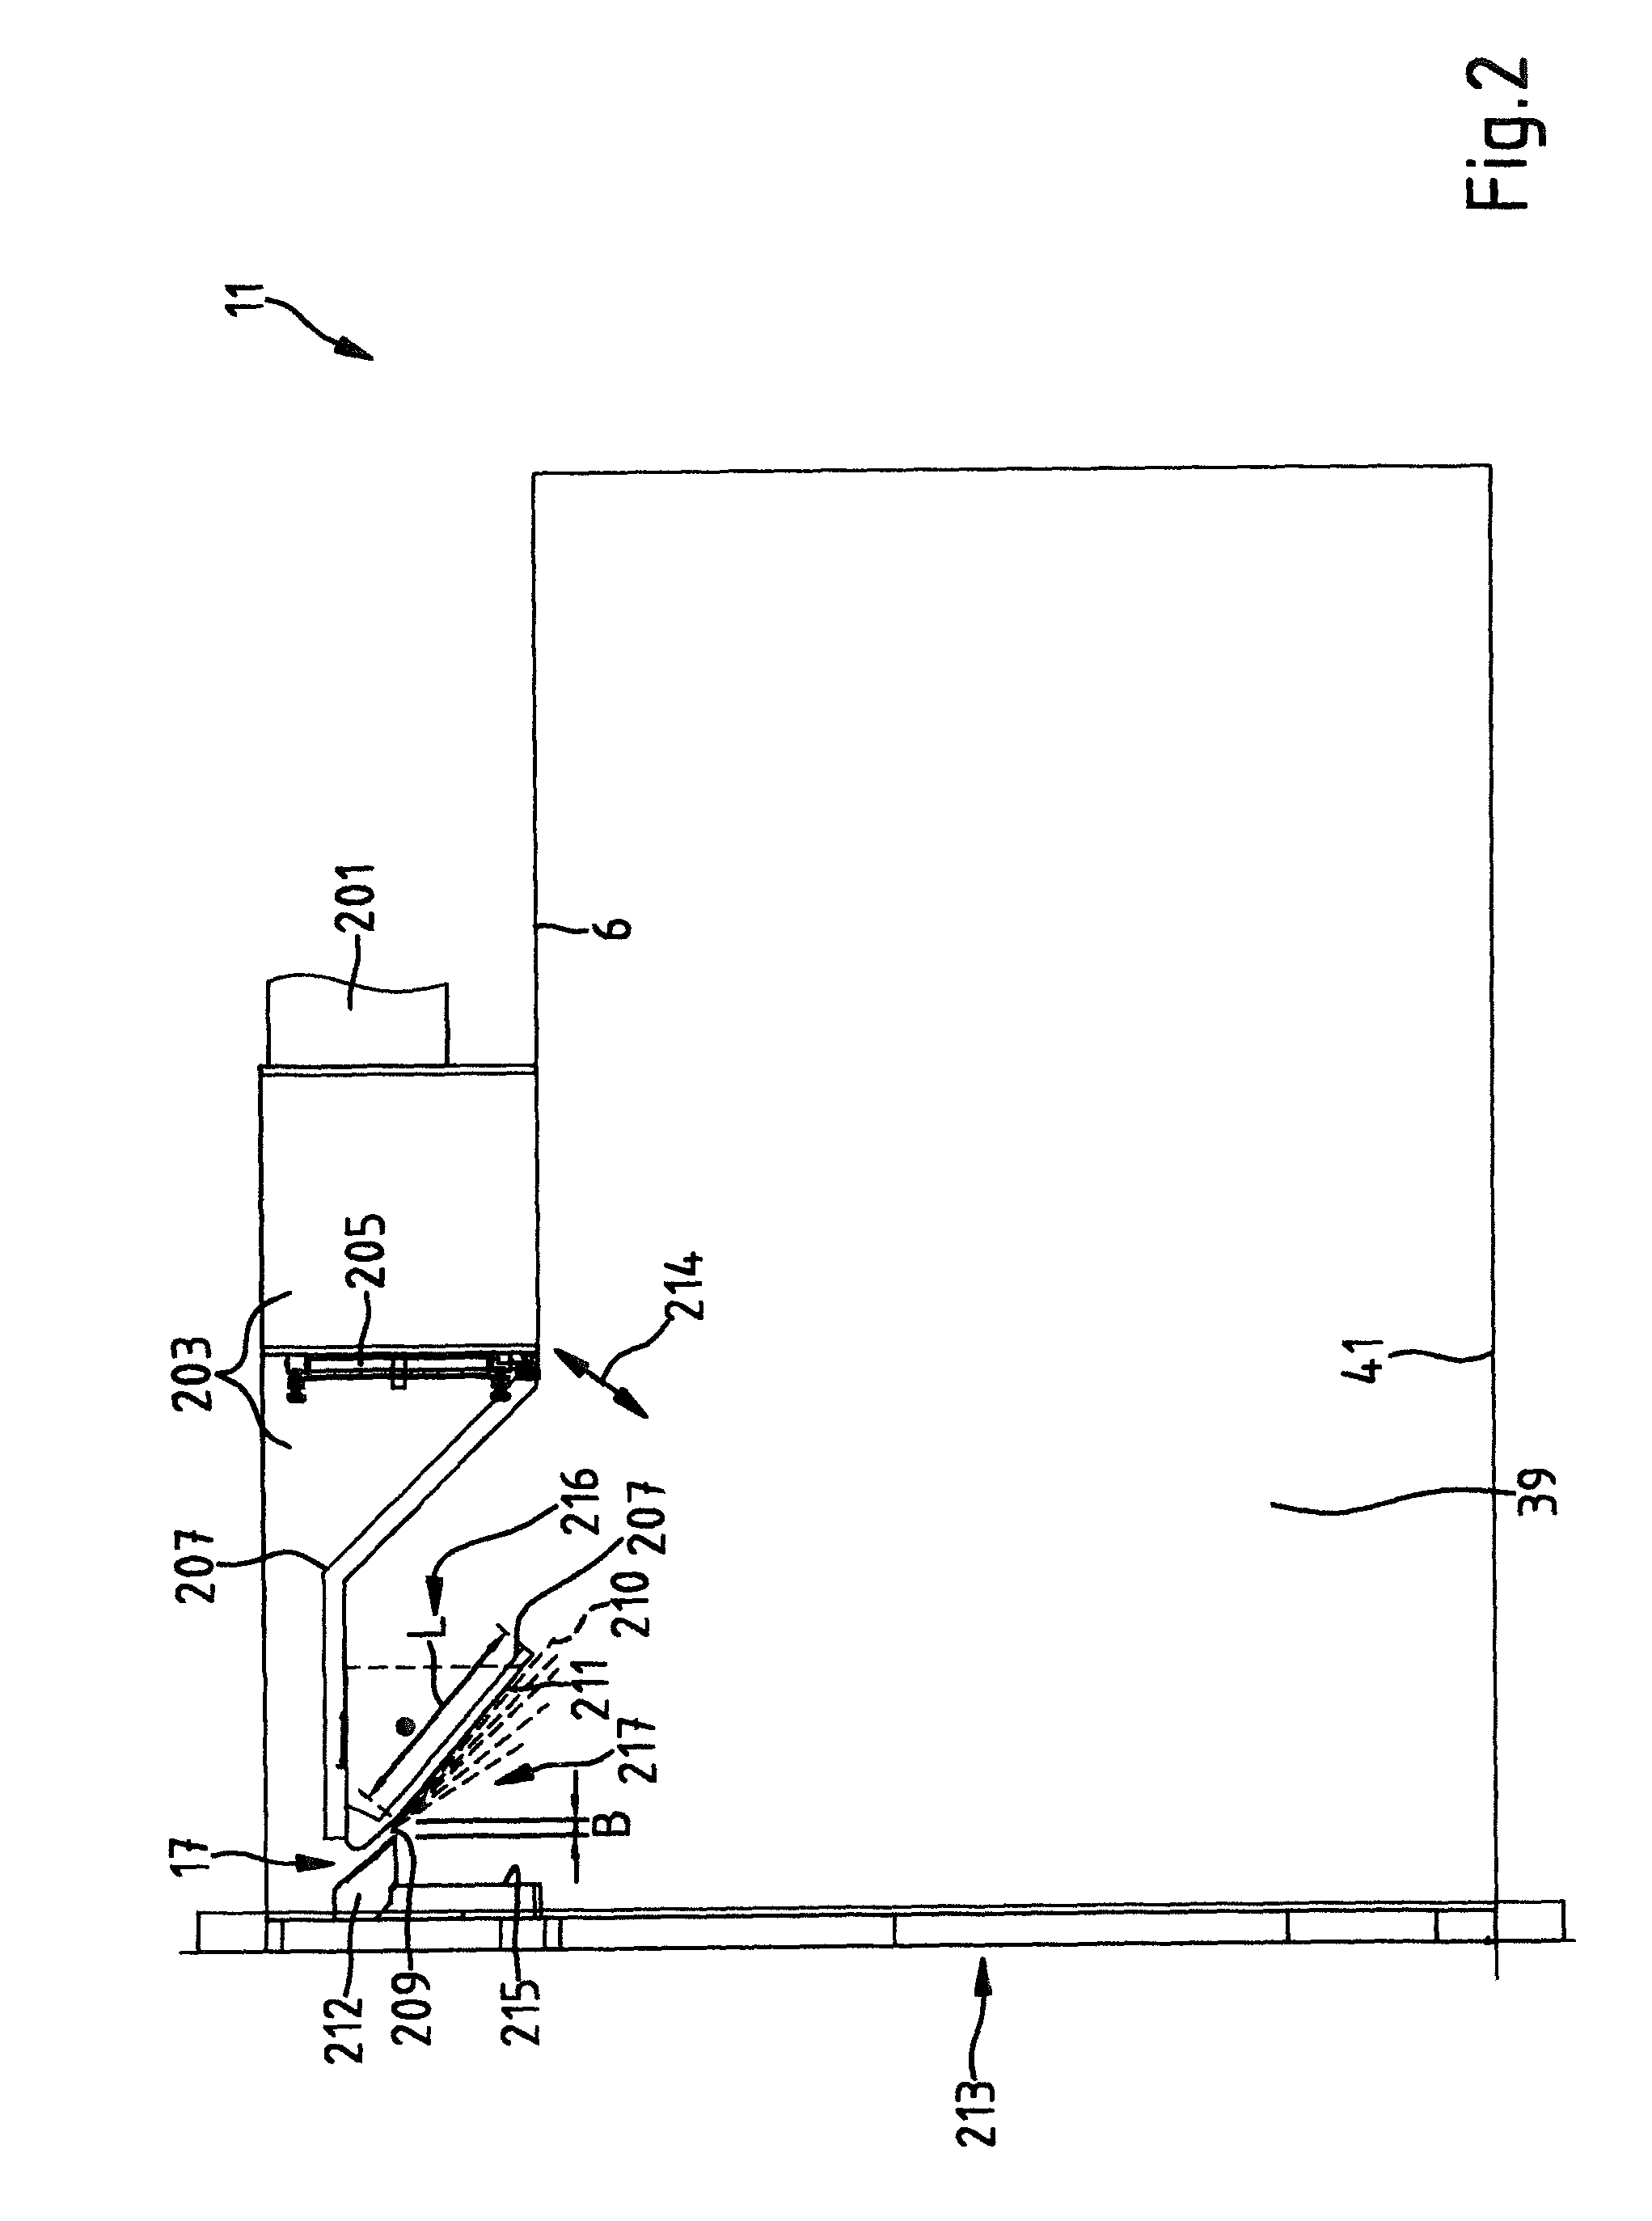 Process chamber incorporating an arrangement for injecting gaseous fluid thereinto